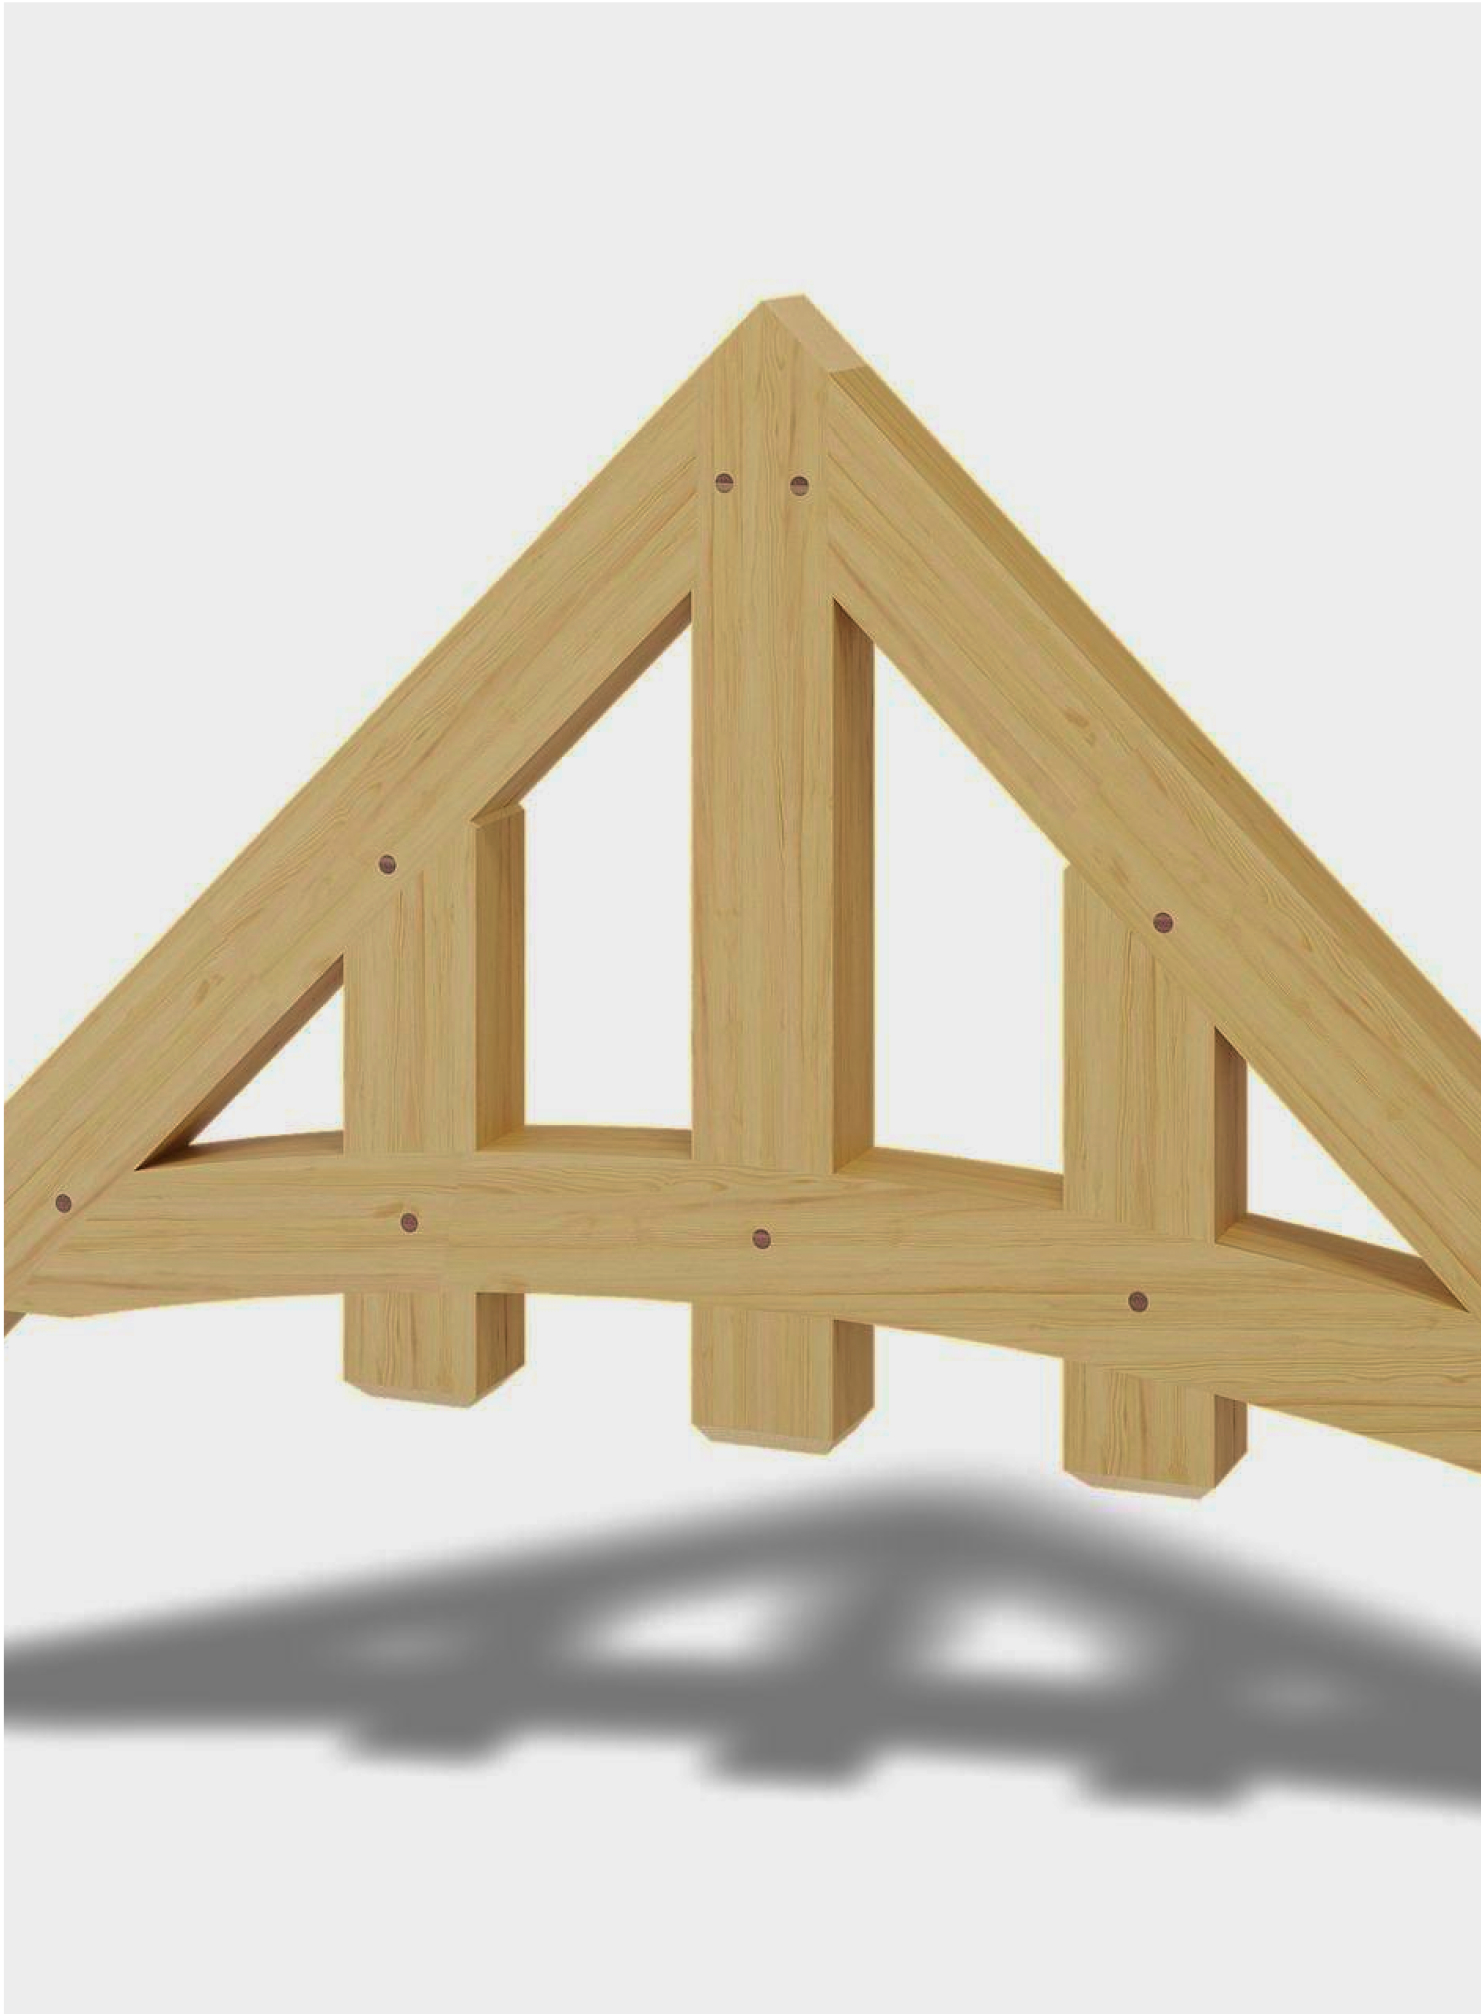 Structural timberframe image 2